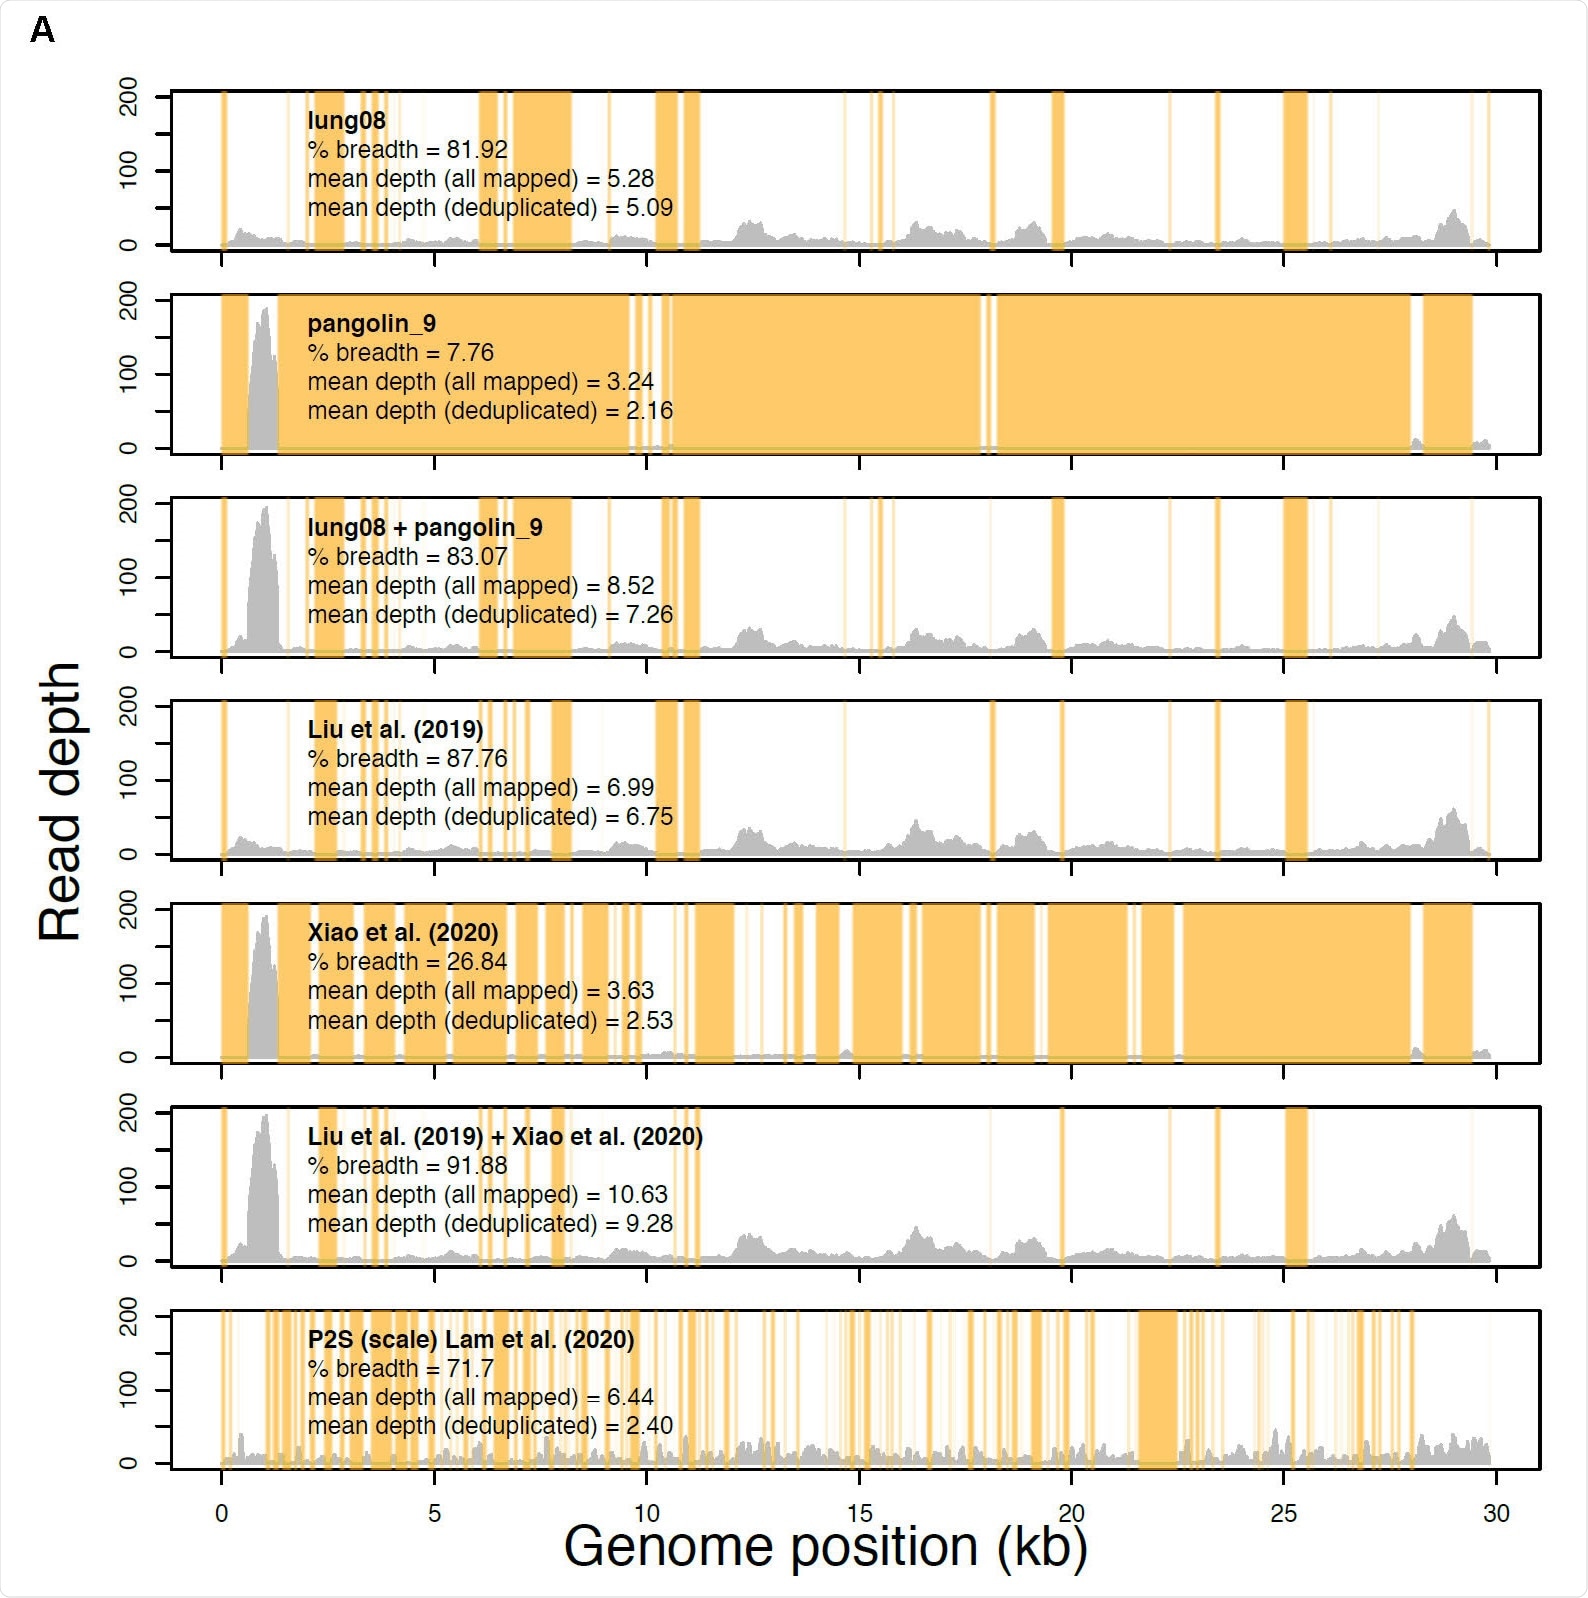 Read profiles of the metagenomic data sets from Liu et al. 2019 Viruses, Xiao et al. 2020 Nature, and Lam et al. 2020 Nature mapped to the Xiao et al. Guangdong pangolin CoV genome sequence GD_1 (EPI_ISL_410721). Samples lung08 (described in Liu et al. Viruses but re-introduced as M4 by Xiao et al. Nature) and pangolin_9 (sample M1, Xiao et al. Nature) each had the most sequence data of all samples analyzed in Liu et al. Viruses and Xiao et al. Nature, respectively. The “lung08 + pangolin_9” track shows their combined read coverage. The “Liu et al. (2019)” track indicates the read coverage pooled from all of the pangolin samples with mapped reads. The “Xiao et al. (2020)” track reveals the read coverage pooled from all samples unique to Xiao et al. Nature with mapped reads